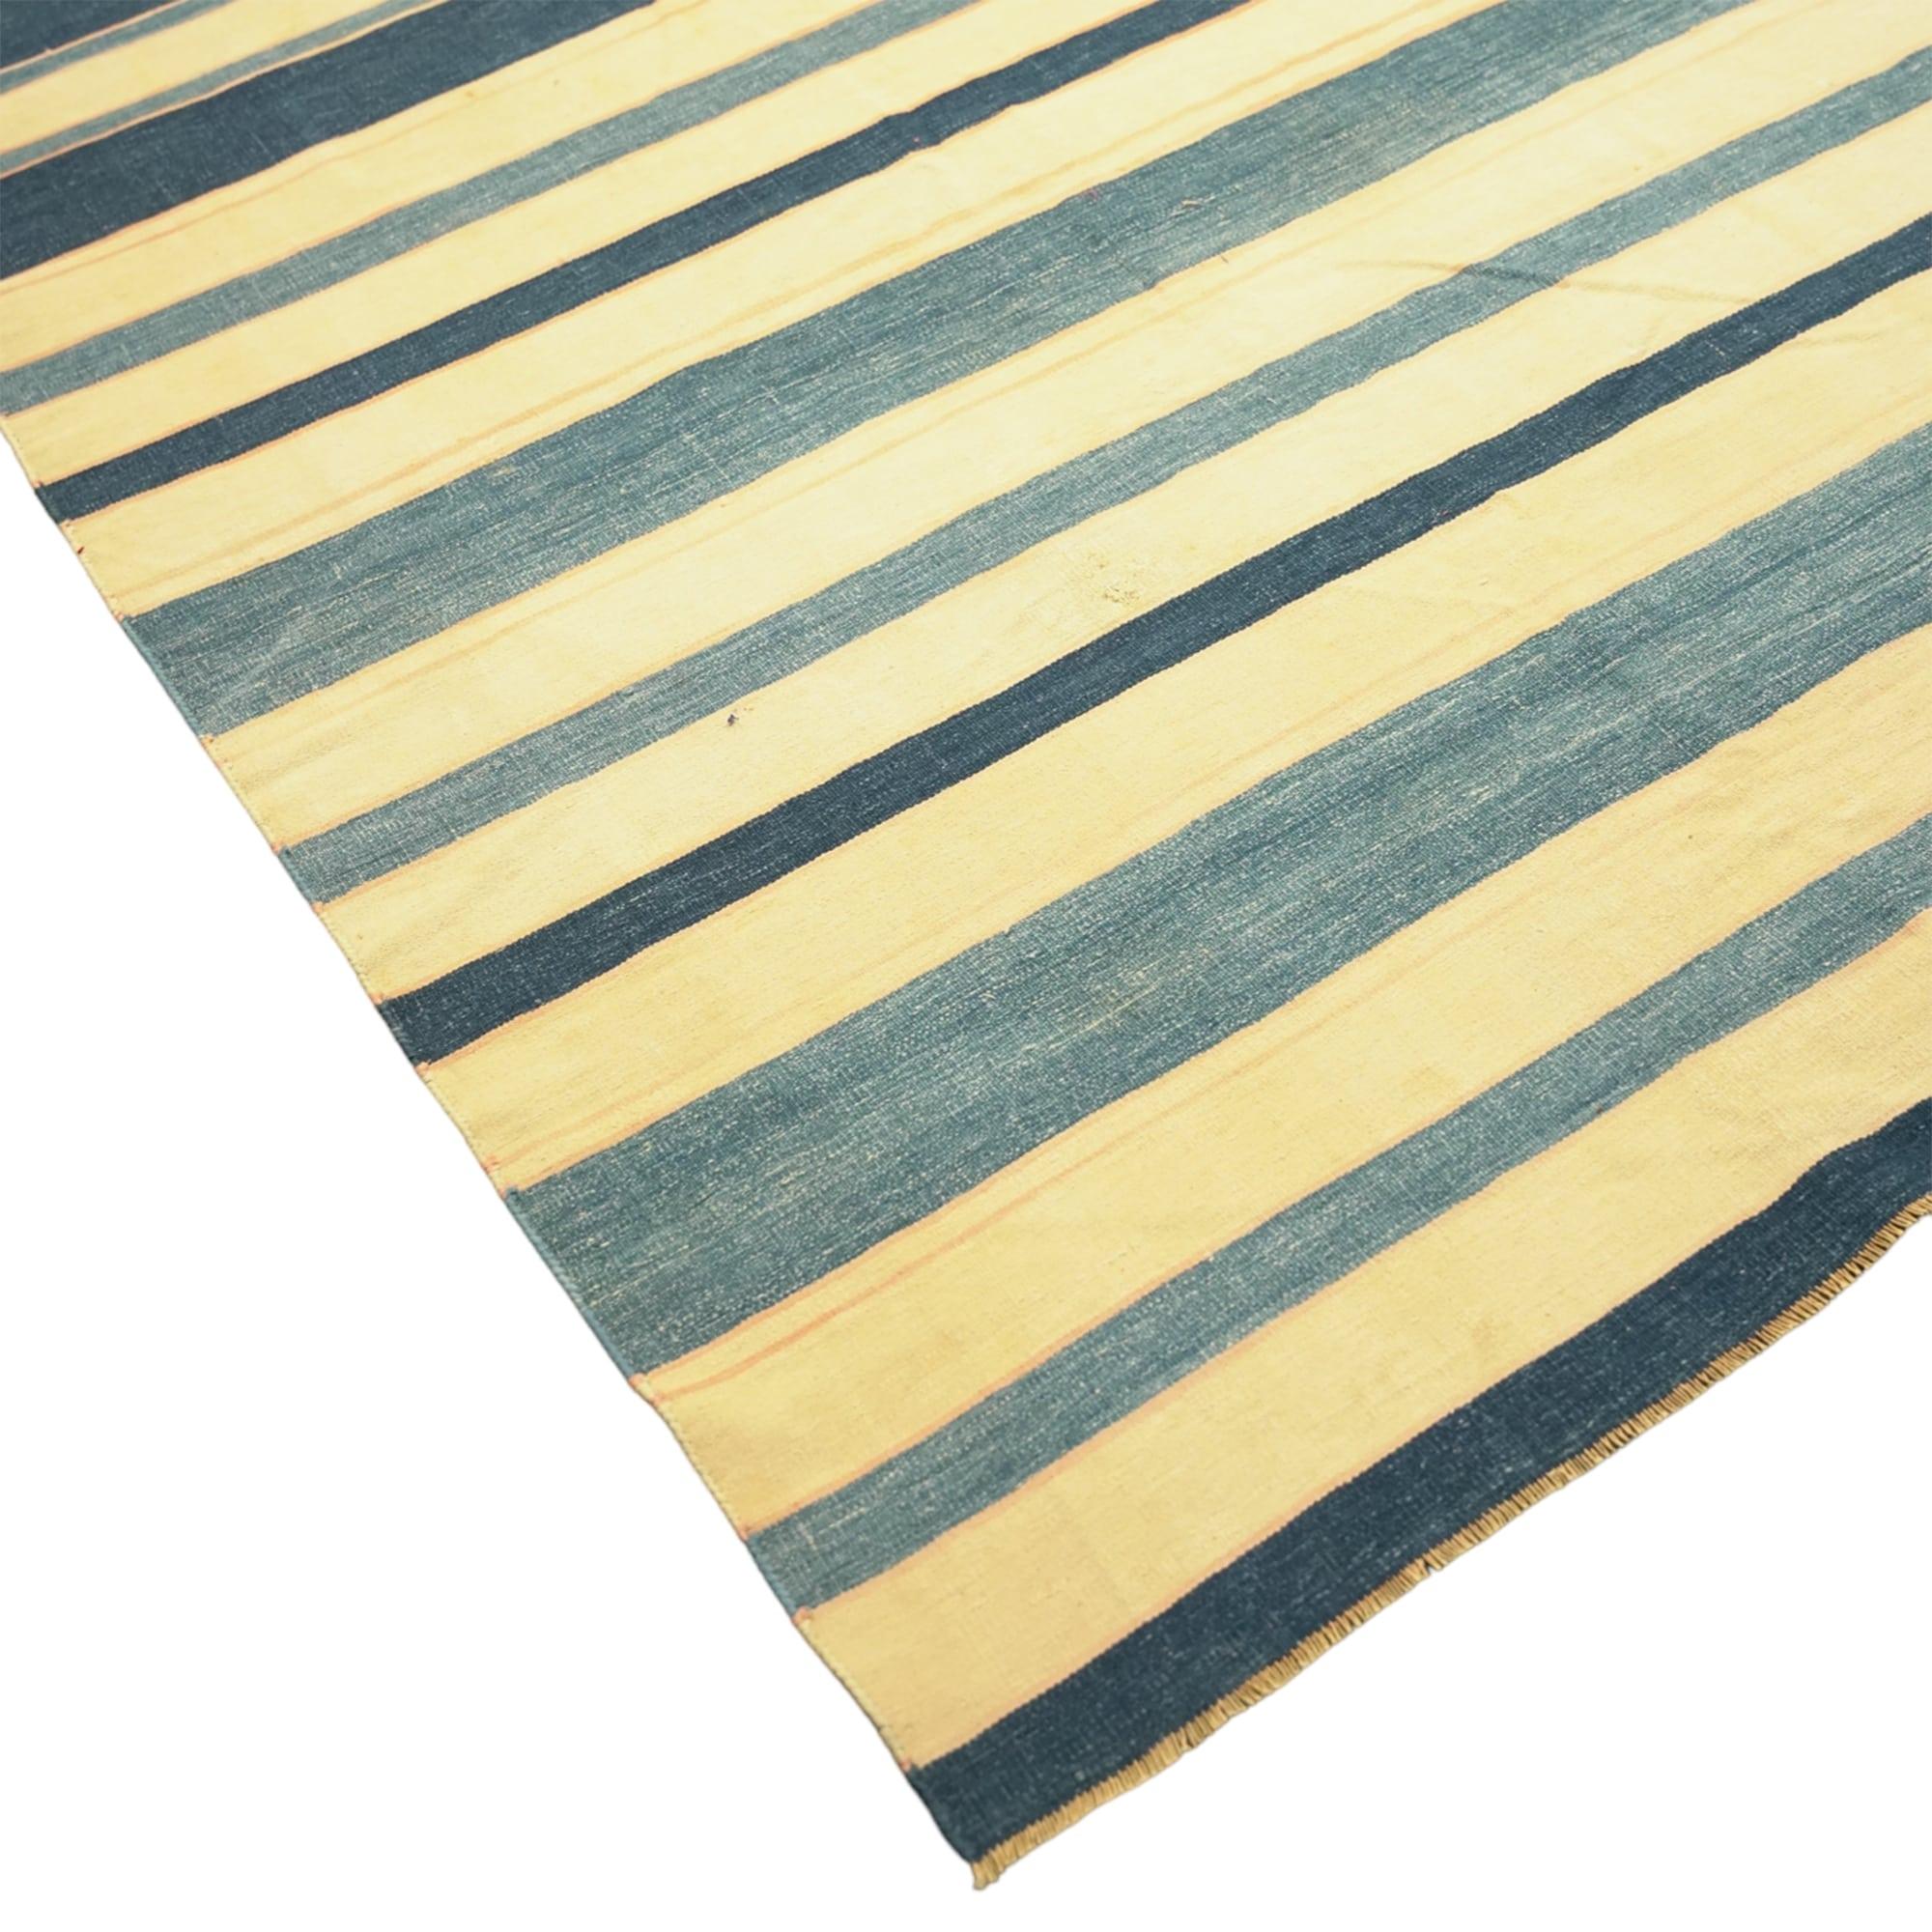 Vintage Dhurrie Rug with Stripes, from Rug & Kilim In Good Condition For Sale In Long Island City, NY